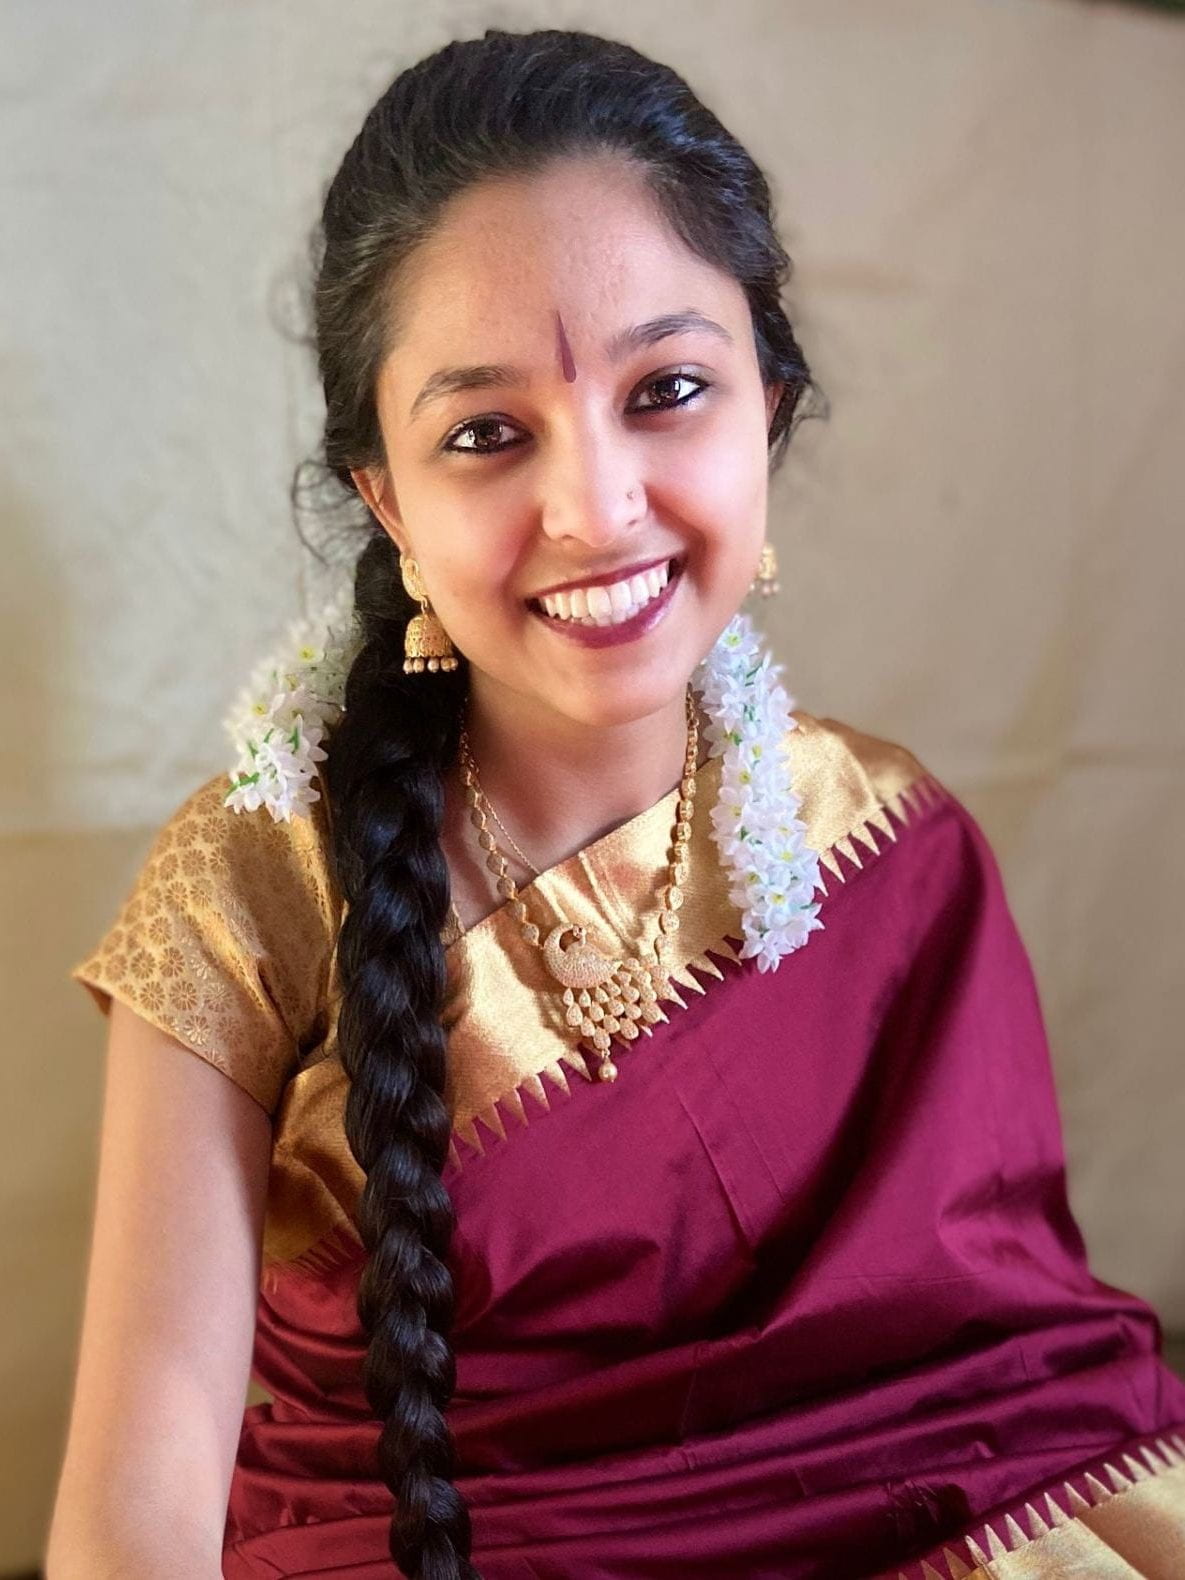 Sushmitha Ravikumar, a South Asian woman in a gold-bordered maroon sari and wearing her long dark hair braided over her shoulder, smiles as she sits in front of a taupe-coloured wall.